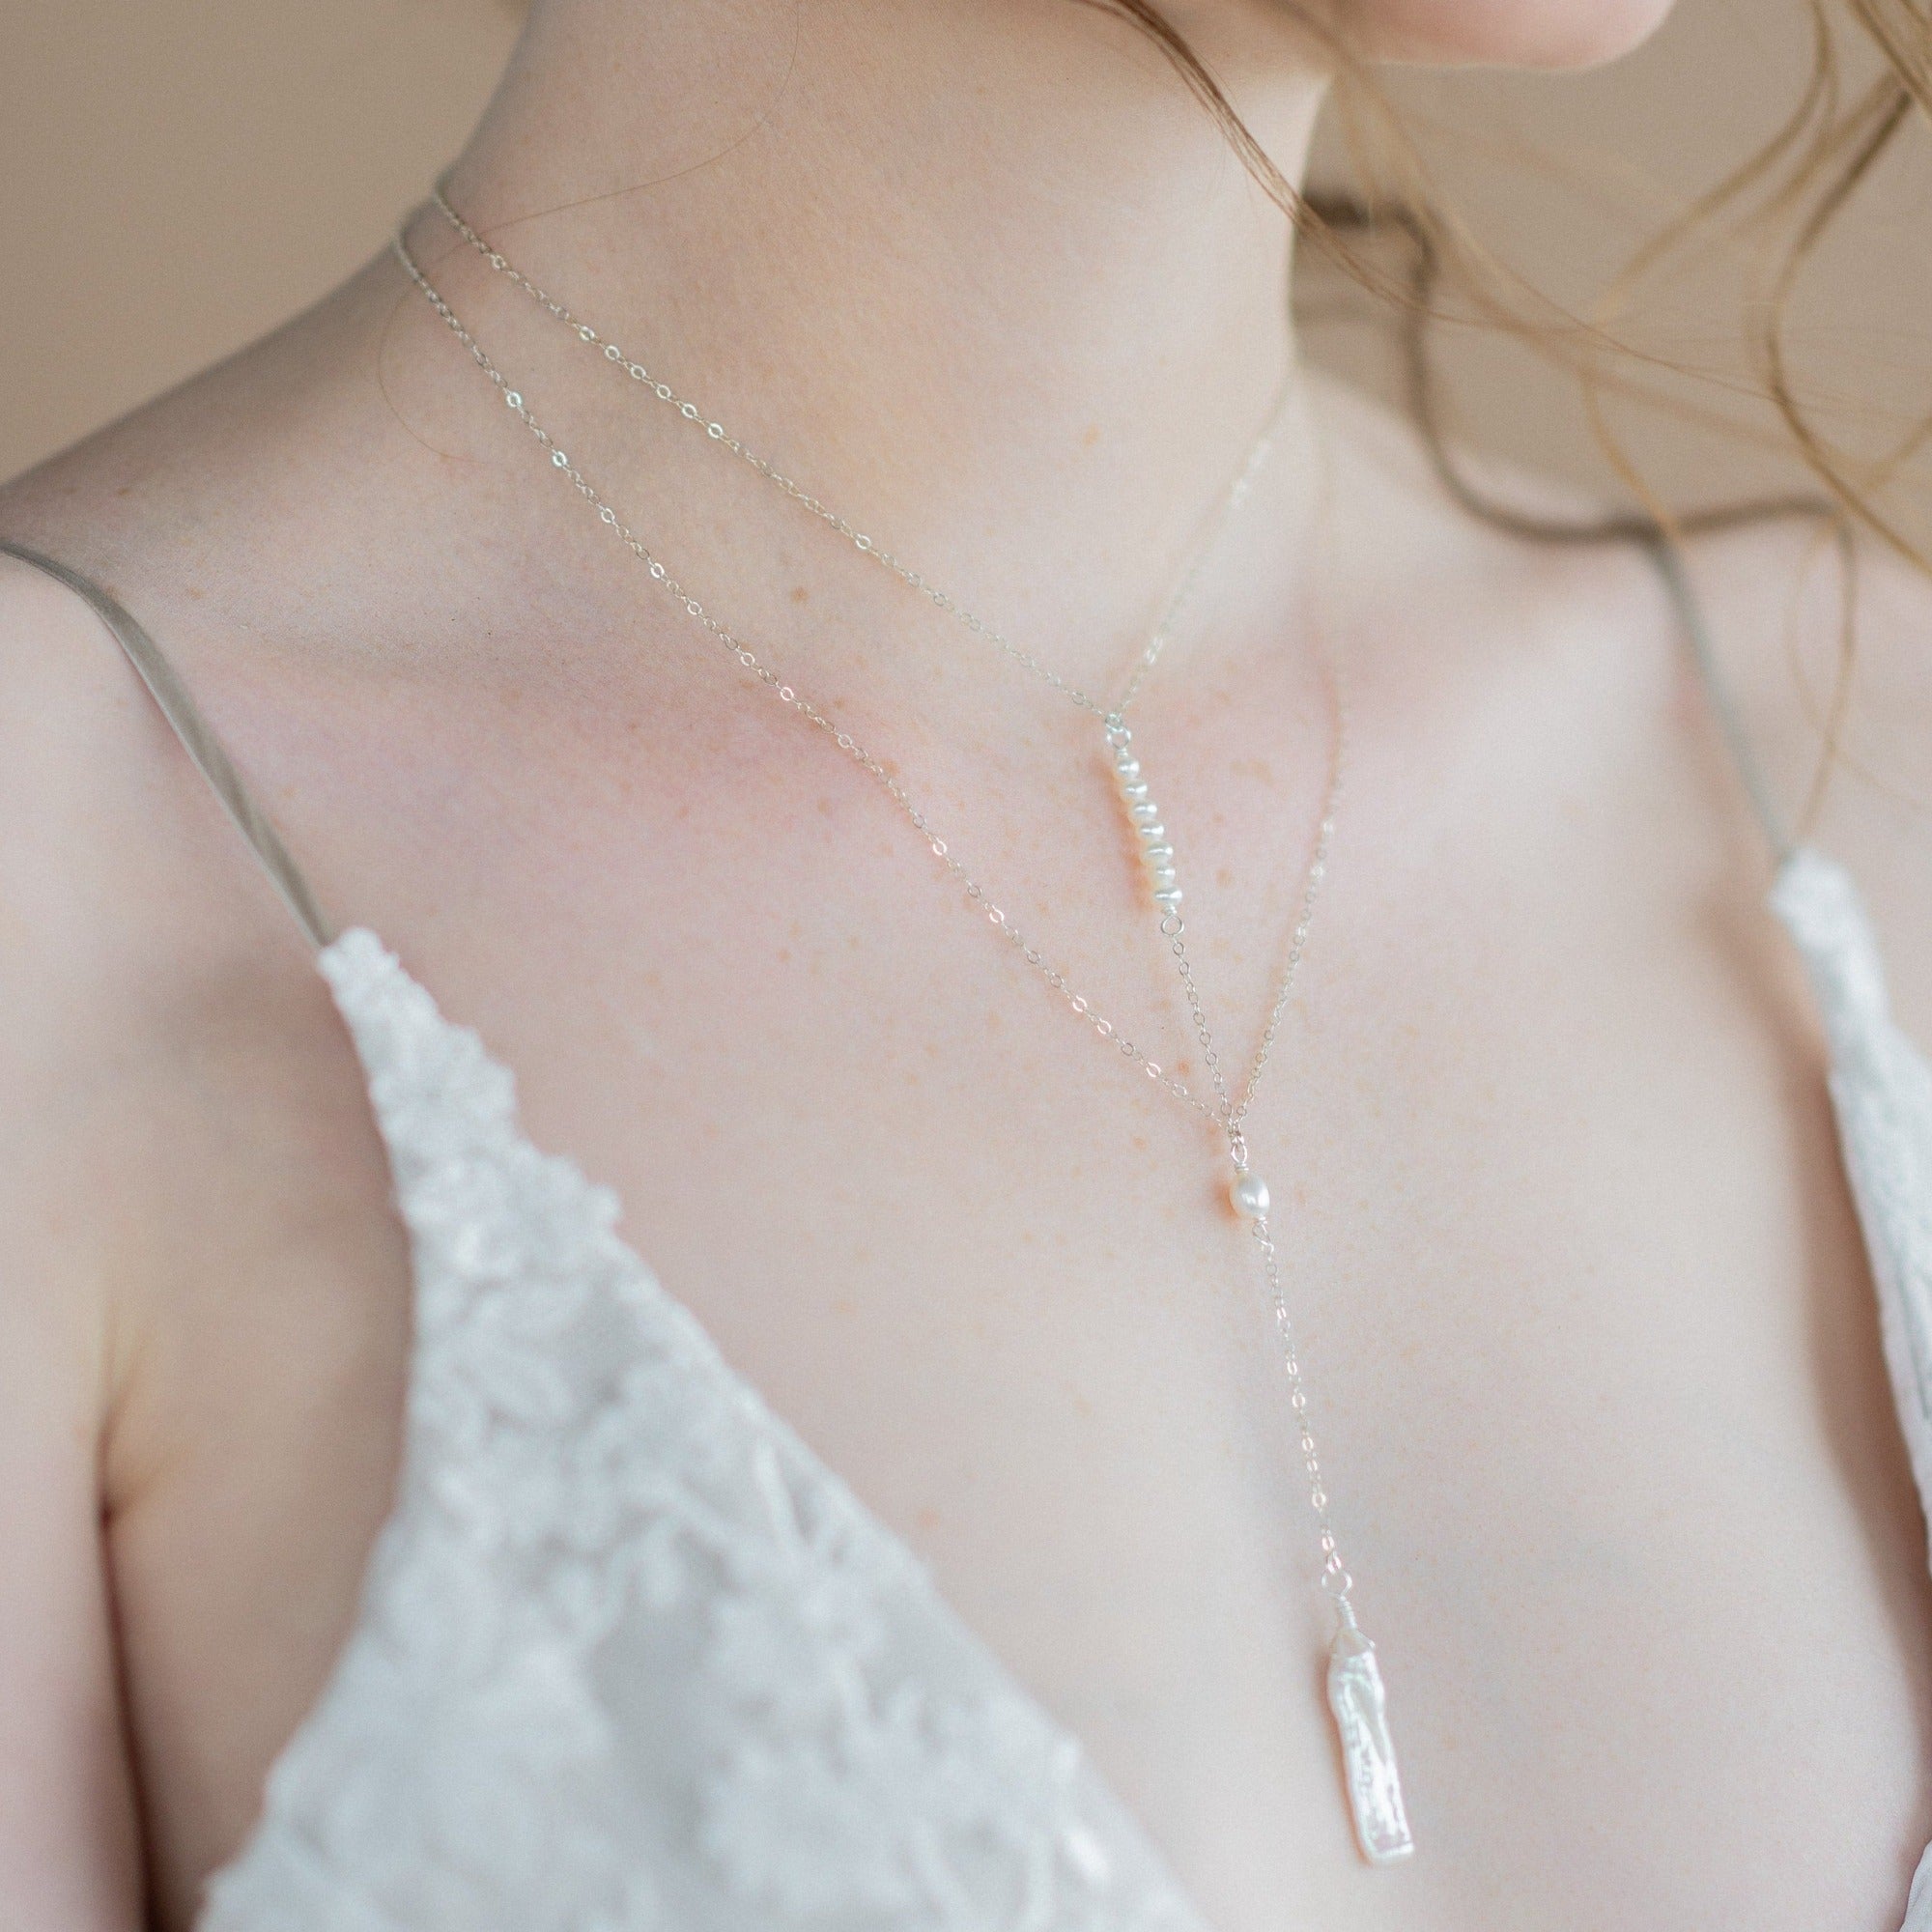 White Pearl Dainty Necklace, Pearl Bridal Necklace, V Shaped Wedding Pearl  Necklace, Bridal Pearl Choker Delicate Necklace, Bridal Jewelry - Etsy | Bridal  pearl necklace, Pearl necklace wedding, Bridal necklace